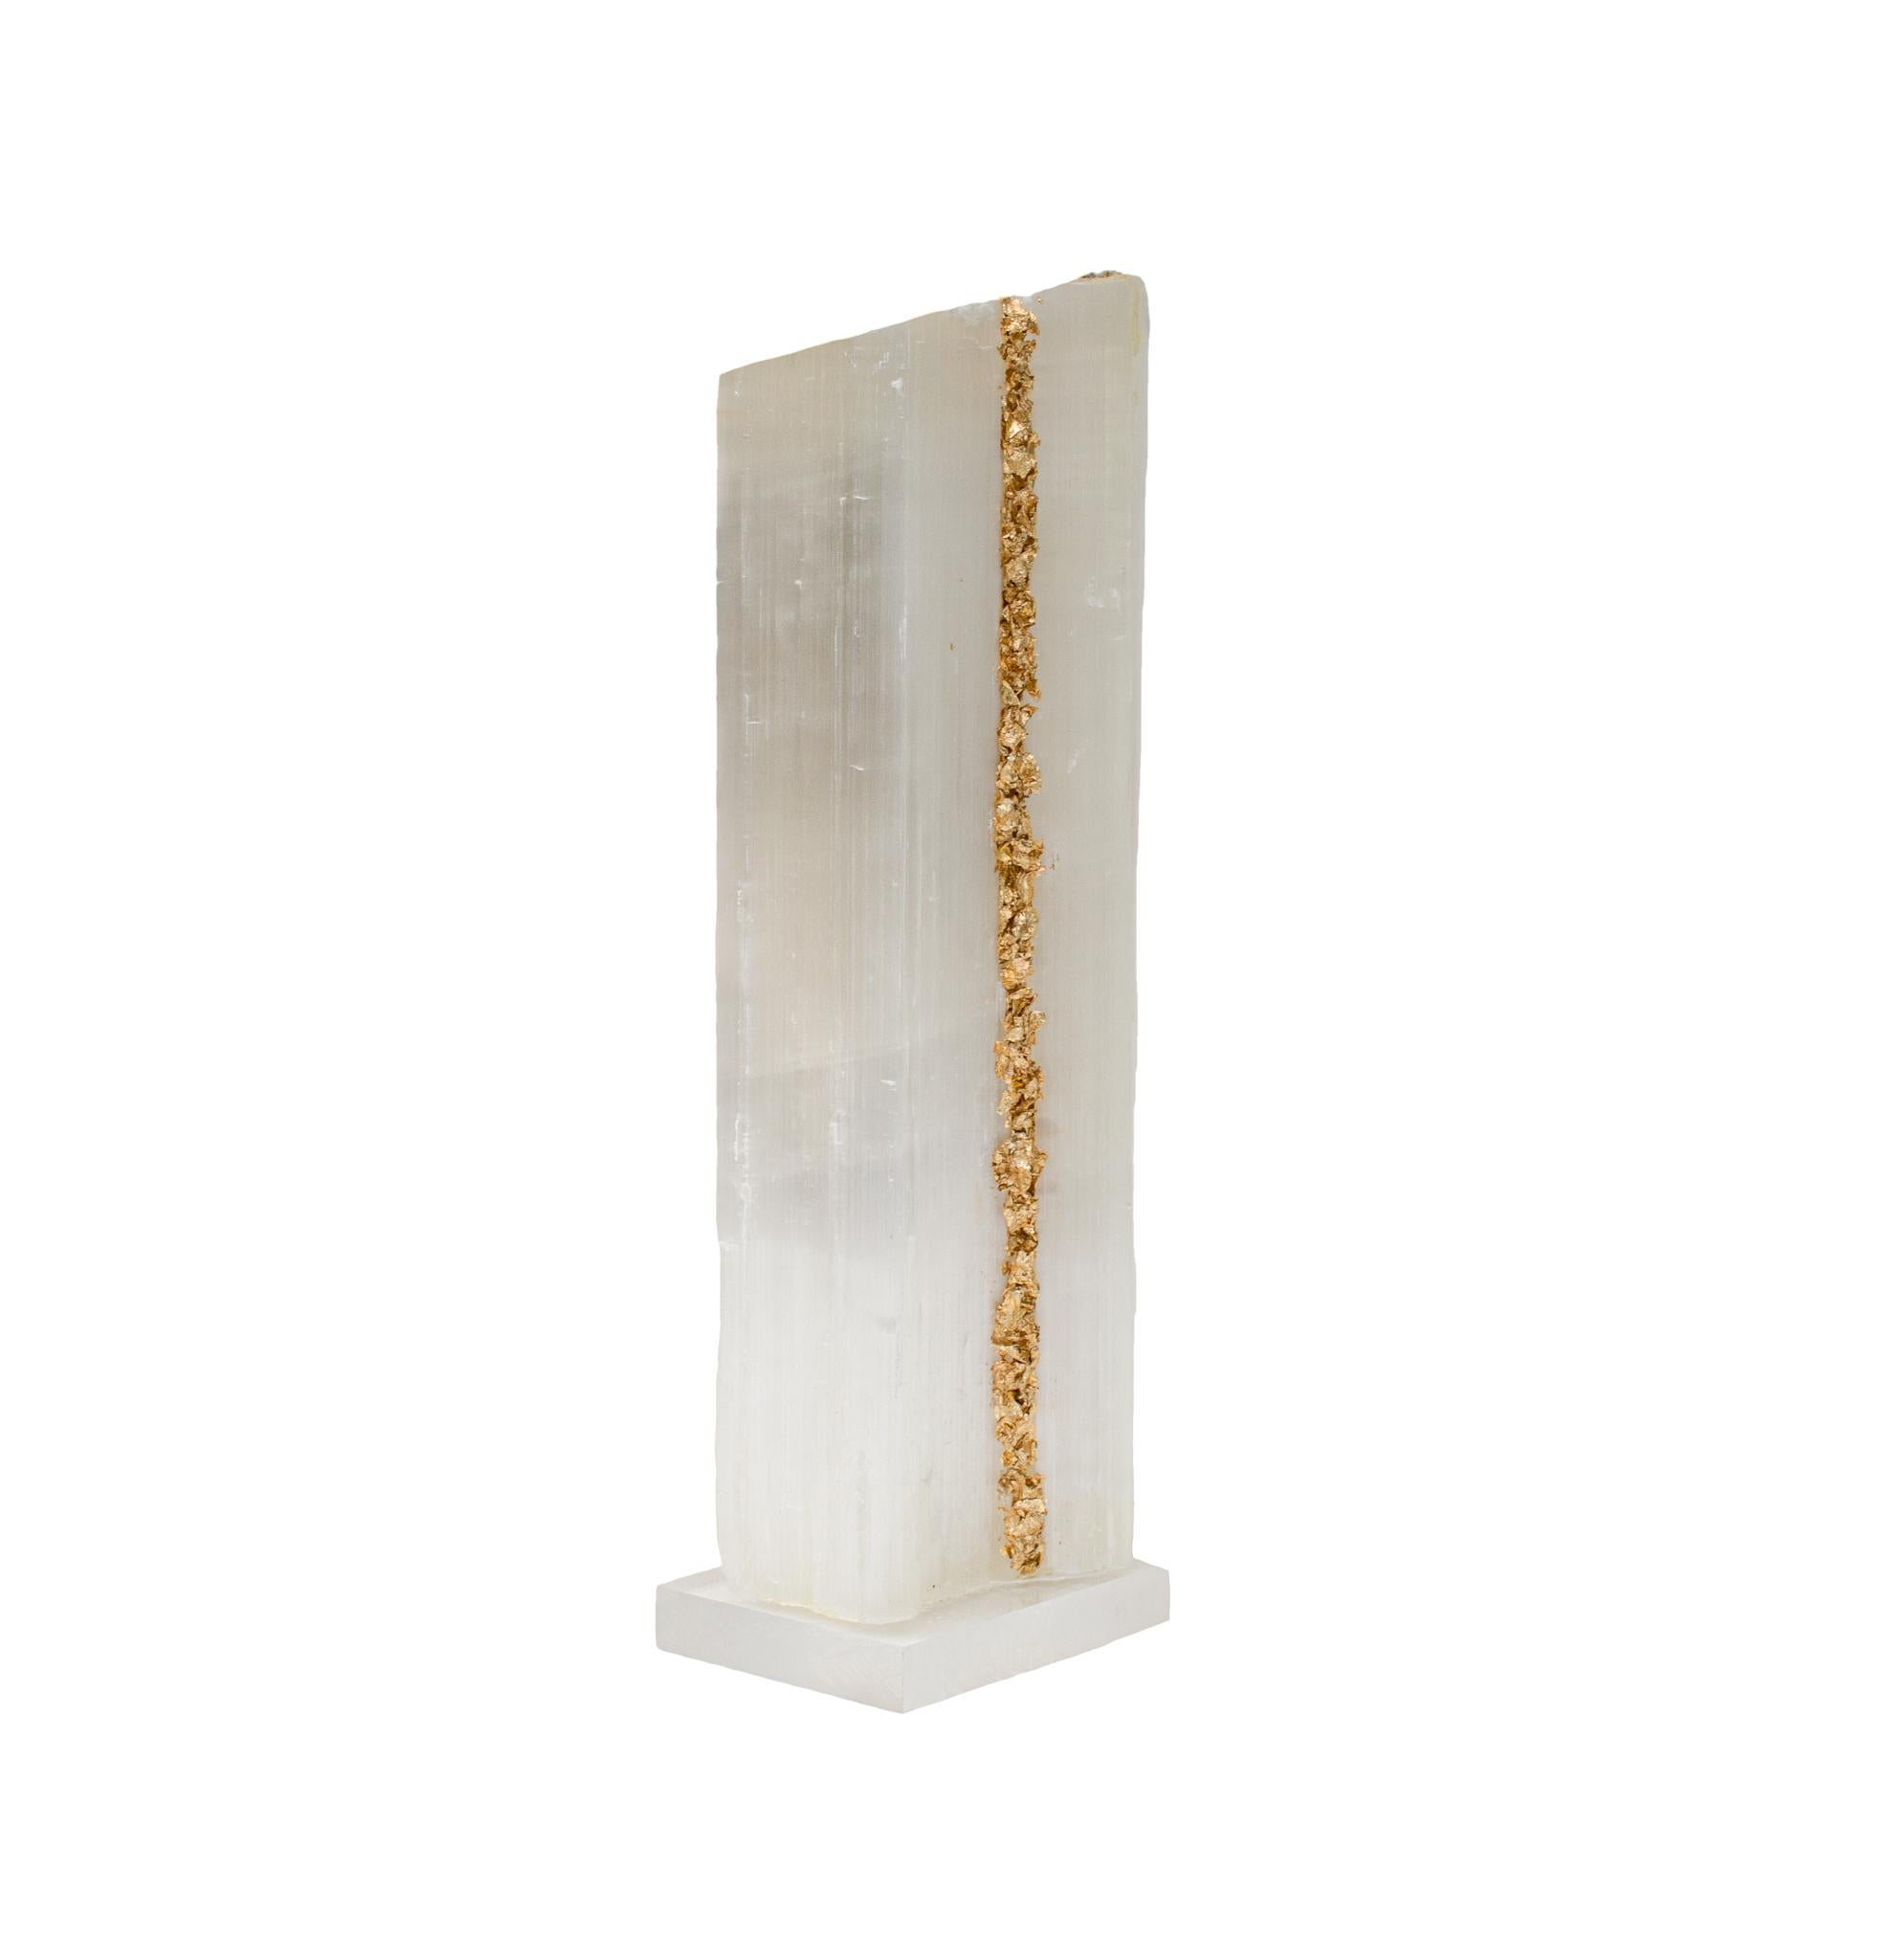 Ruler Selenite with gold leaf on a Lucite base. Selenite logs are single, prismatic selenite crystals from Morocco that were formed in extensive beds by the evaporation of ocean brine. This mineral is characterized by a silky, pearly luster called